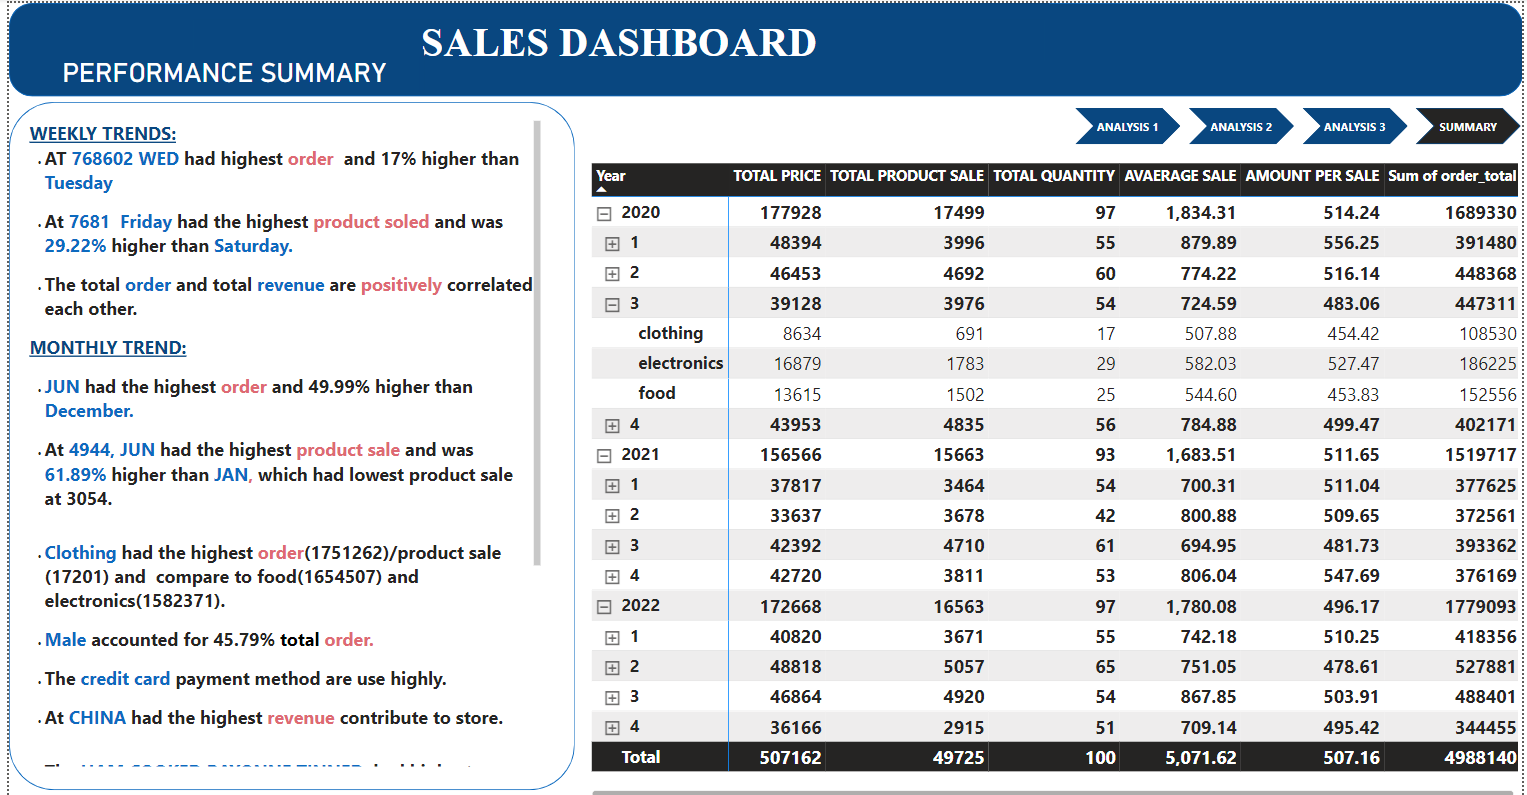 SALES DASHBOARD

PERFORMANCE SUMMARY

 

WEEKLY TRENDS;
AT 768602 WED had highest order and 17% higher than
Tuesday

At 7681 Friday had the highest product soled and was
29.22% higher than Saturday.

The total order and total revenue are positively correlated
each other.

MONTHLY TREND:

JUN had the highest order and 49.99% higher than
December.

At 4944, JUN had the highest product sale and was
61.89% higher than JAN, which had lowest product sale
213054.

Clothing had the highest order(1751262)/product sale
(17201) and compare to food(1654507) and
electronics(1582371).

Male accounted for 45.79% total order.
The credit card payment method are use highly.

At CHINA had the highest revenue contribute to store.

= 2020 177928
@1 48394
22 46453
a3 39128

clothing 8634
electronics 16879
food 1161

@4 43953

= 2021 156566
@1 37817
22 33637
®3 42392
4 42720

= 2022 172668
oR] 40820
®2 48818
23 46864

4 36166

io BE 2AL&gt;]

17499
3996
4692

3976

OTAL PRICE TOTAL PRODUCT SALE TOTAL QUANTITY AVAERAGE SALE AMOUNT PER SALE Sum of order total

97 1.834.31
55 879.89
60 774.22
54 724.59
0) 482.03
) 244 60
56 784.88
93 1,683.51
54 700.31
42 800.88
61 694.95
53 806.04
97 1,780.08
55 742.18
65 751.05
54 867.85
51 709.14

pL 5,071.62

514.24
556.25

516.14
483.06

 

499.47
511.65
511.04
509.65
481.73
547.69
496.17
510.25
478.61
503.91

 

1689330
391480
448368
447311

186204
402171

1519717
377625
372561
393362
376169

1779093
418356
527881
488401
344455

REE